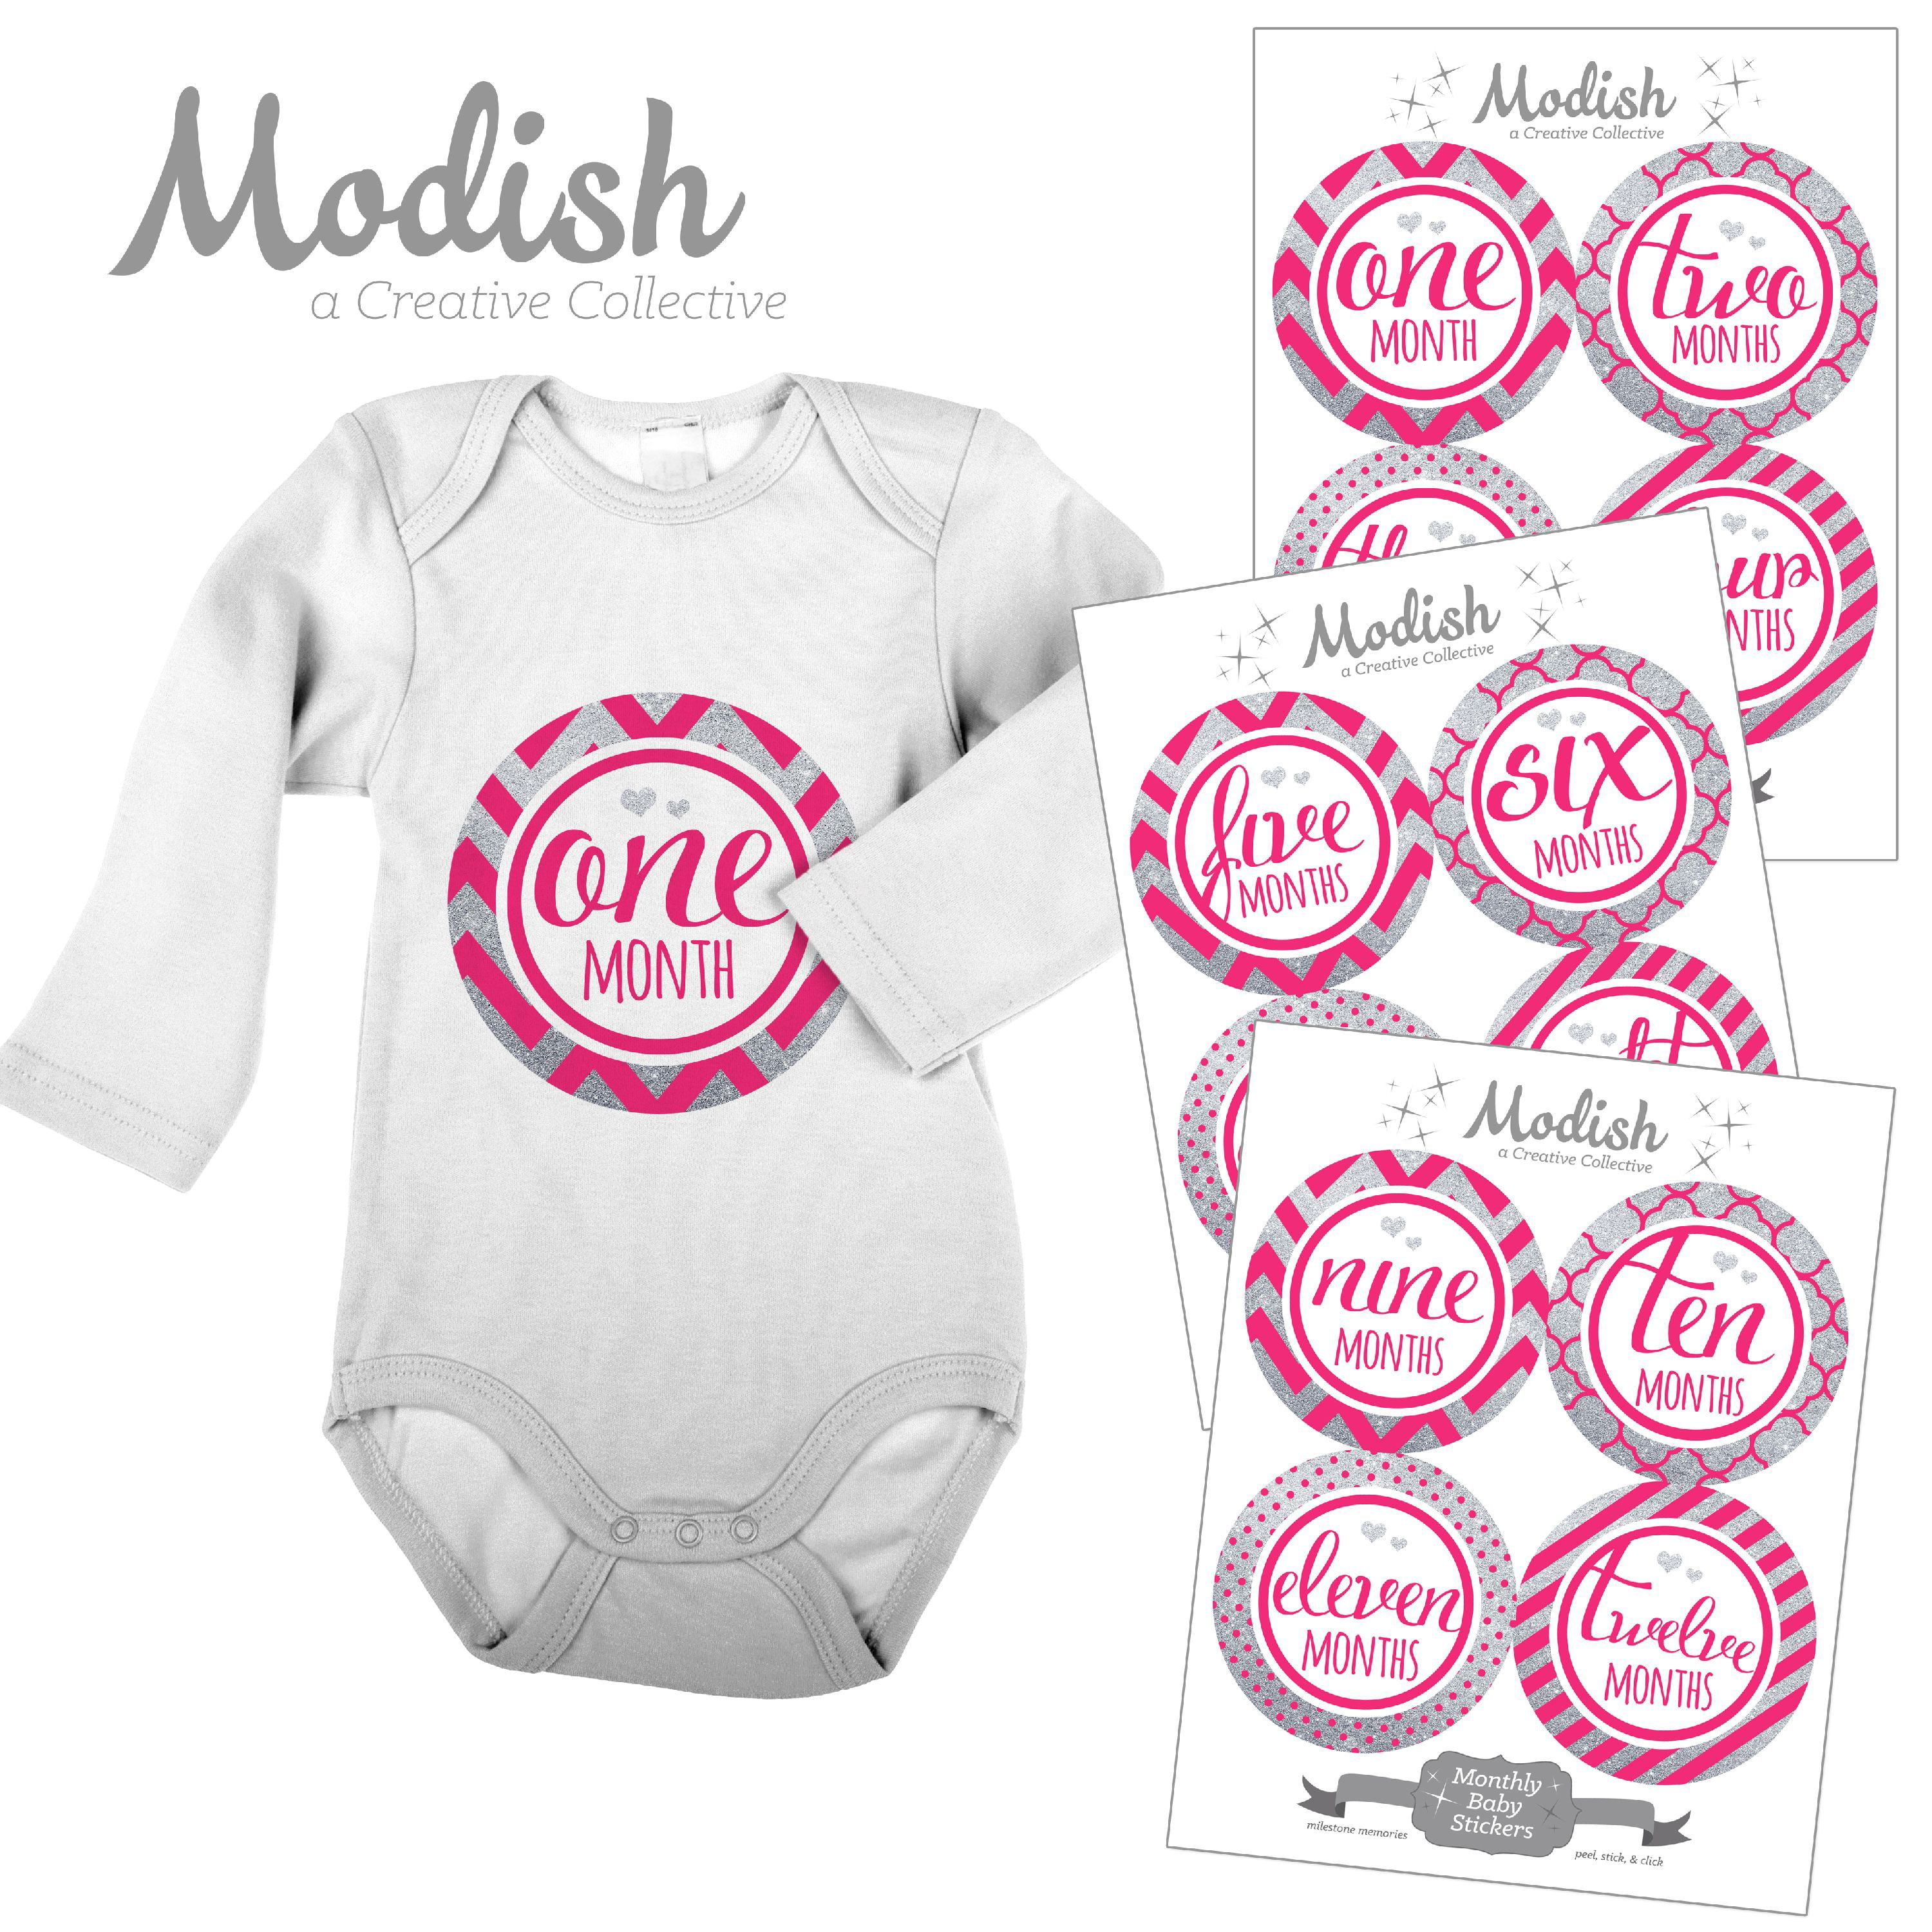 12 Baby 1st First Year Memory Milestone Stickers Photo Props Girls